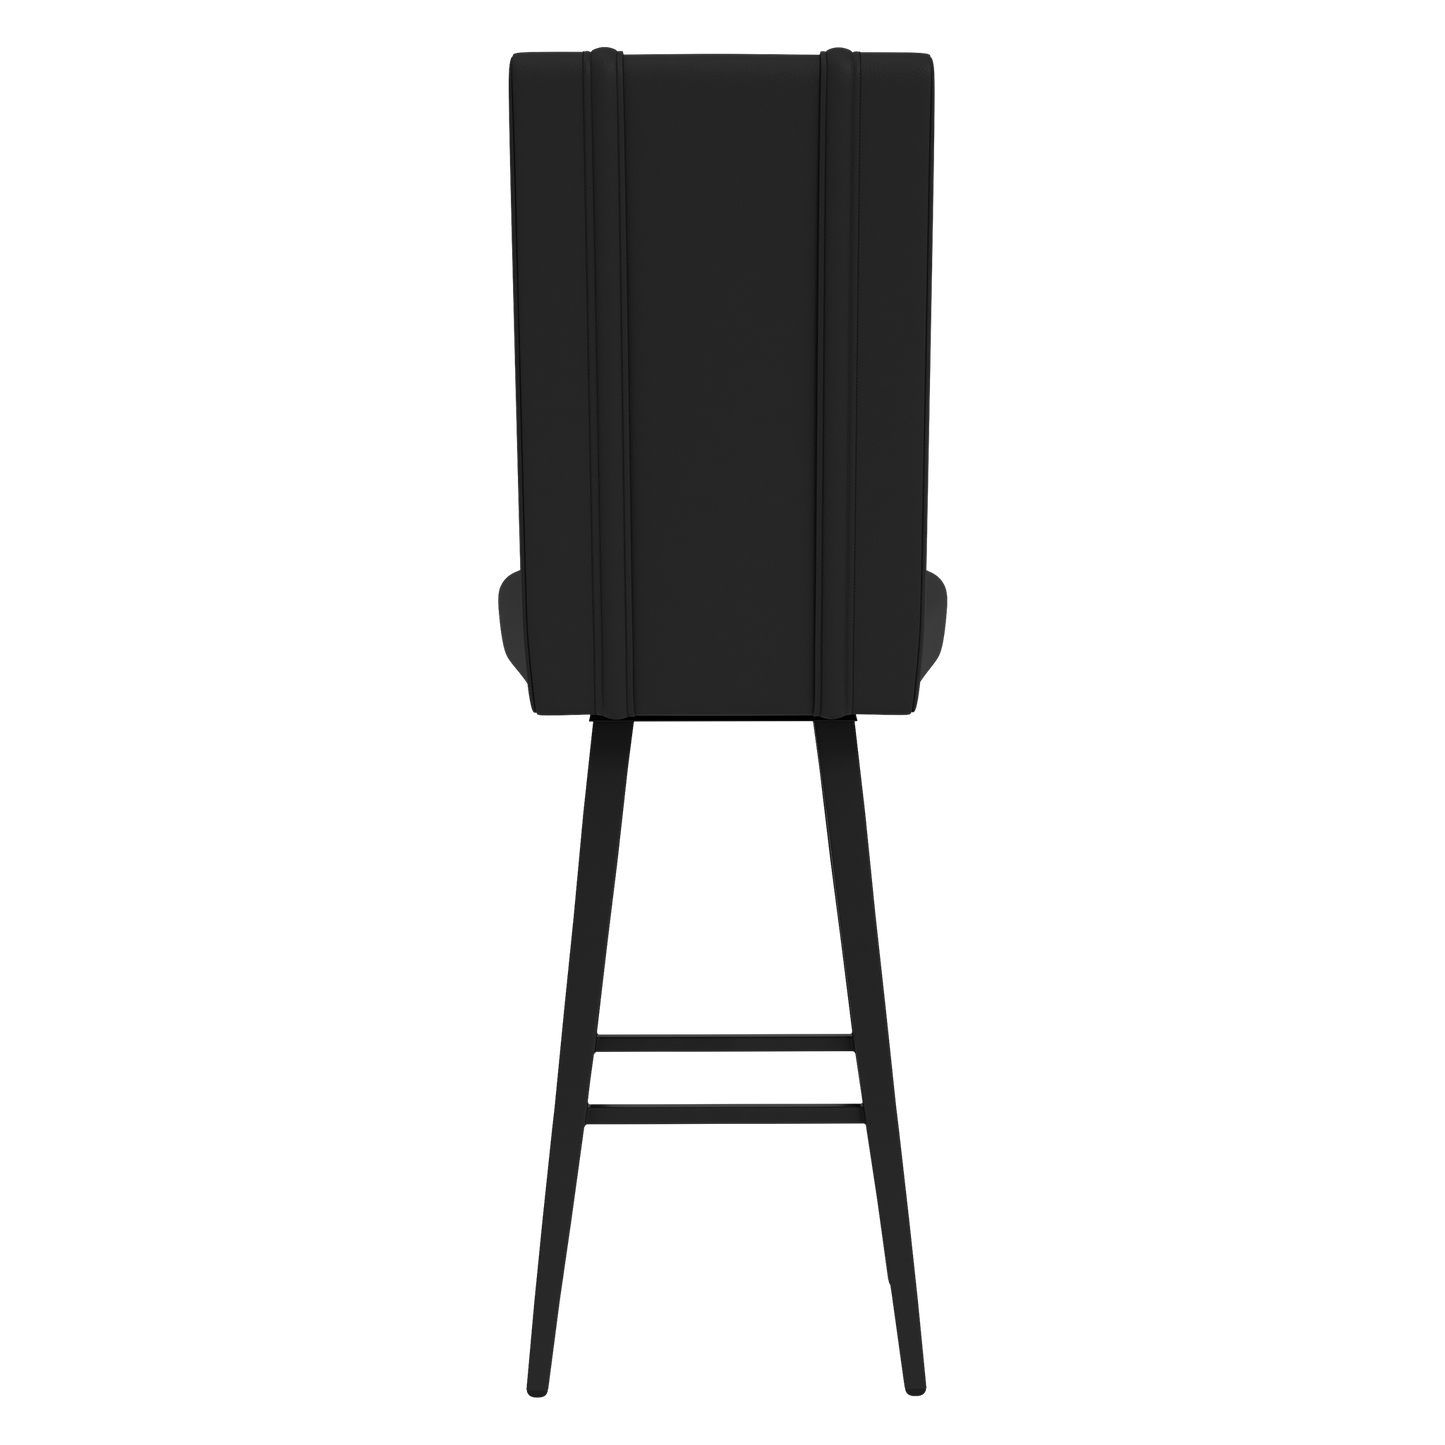 Swivel Bar Stool 2000 with St Louis Cardinals Secondary